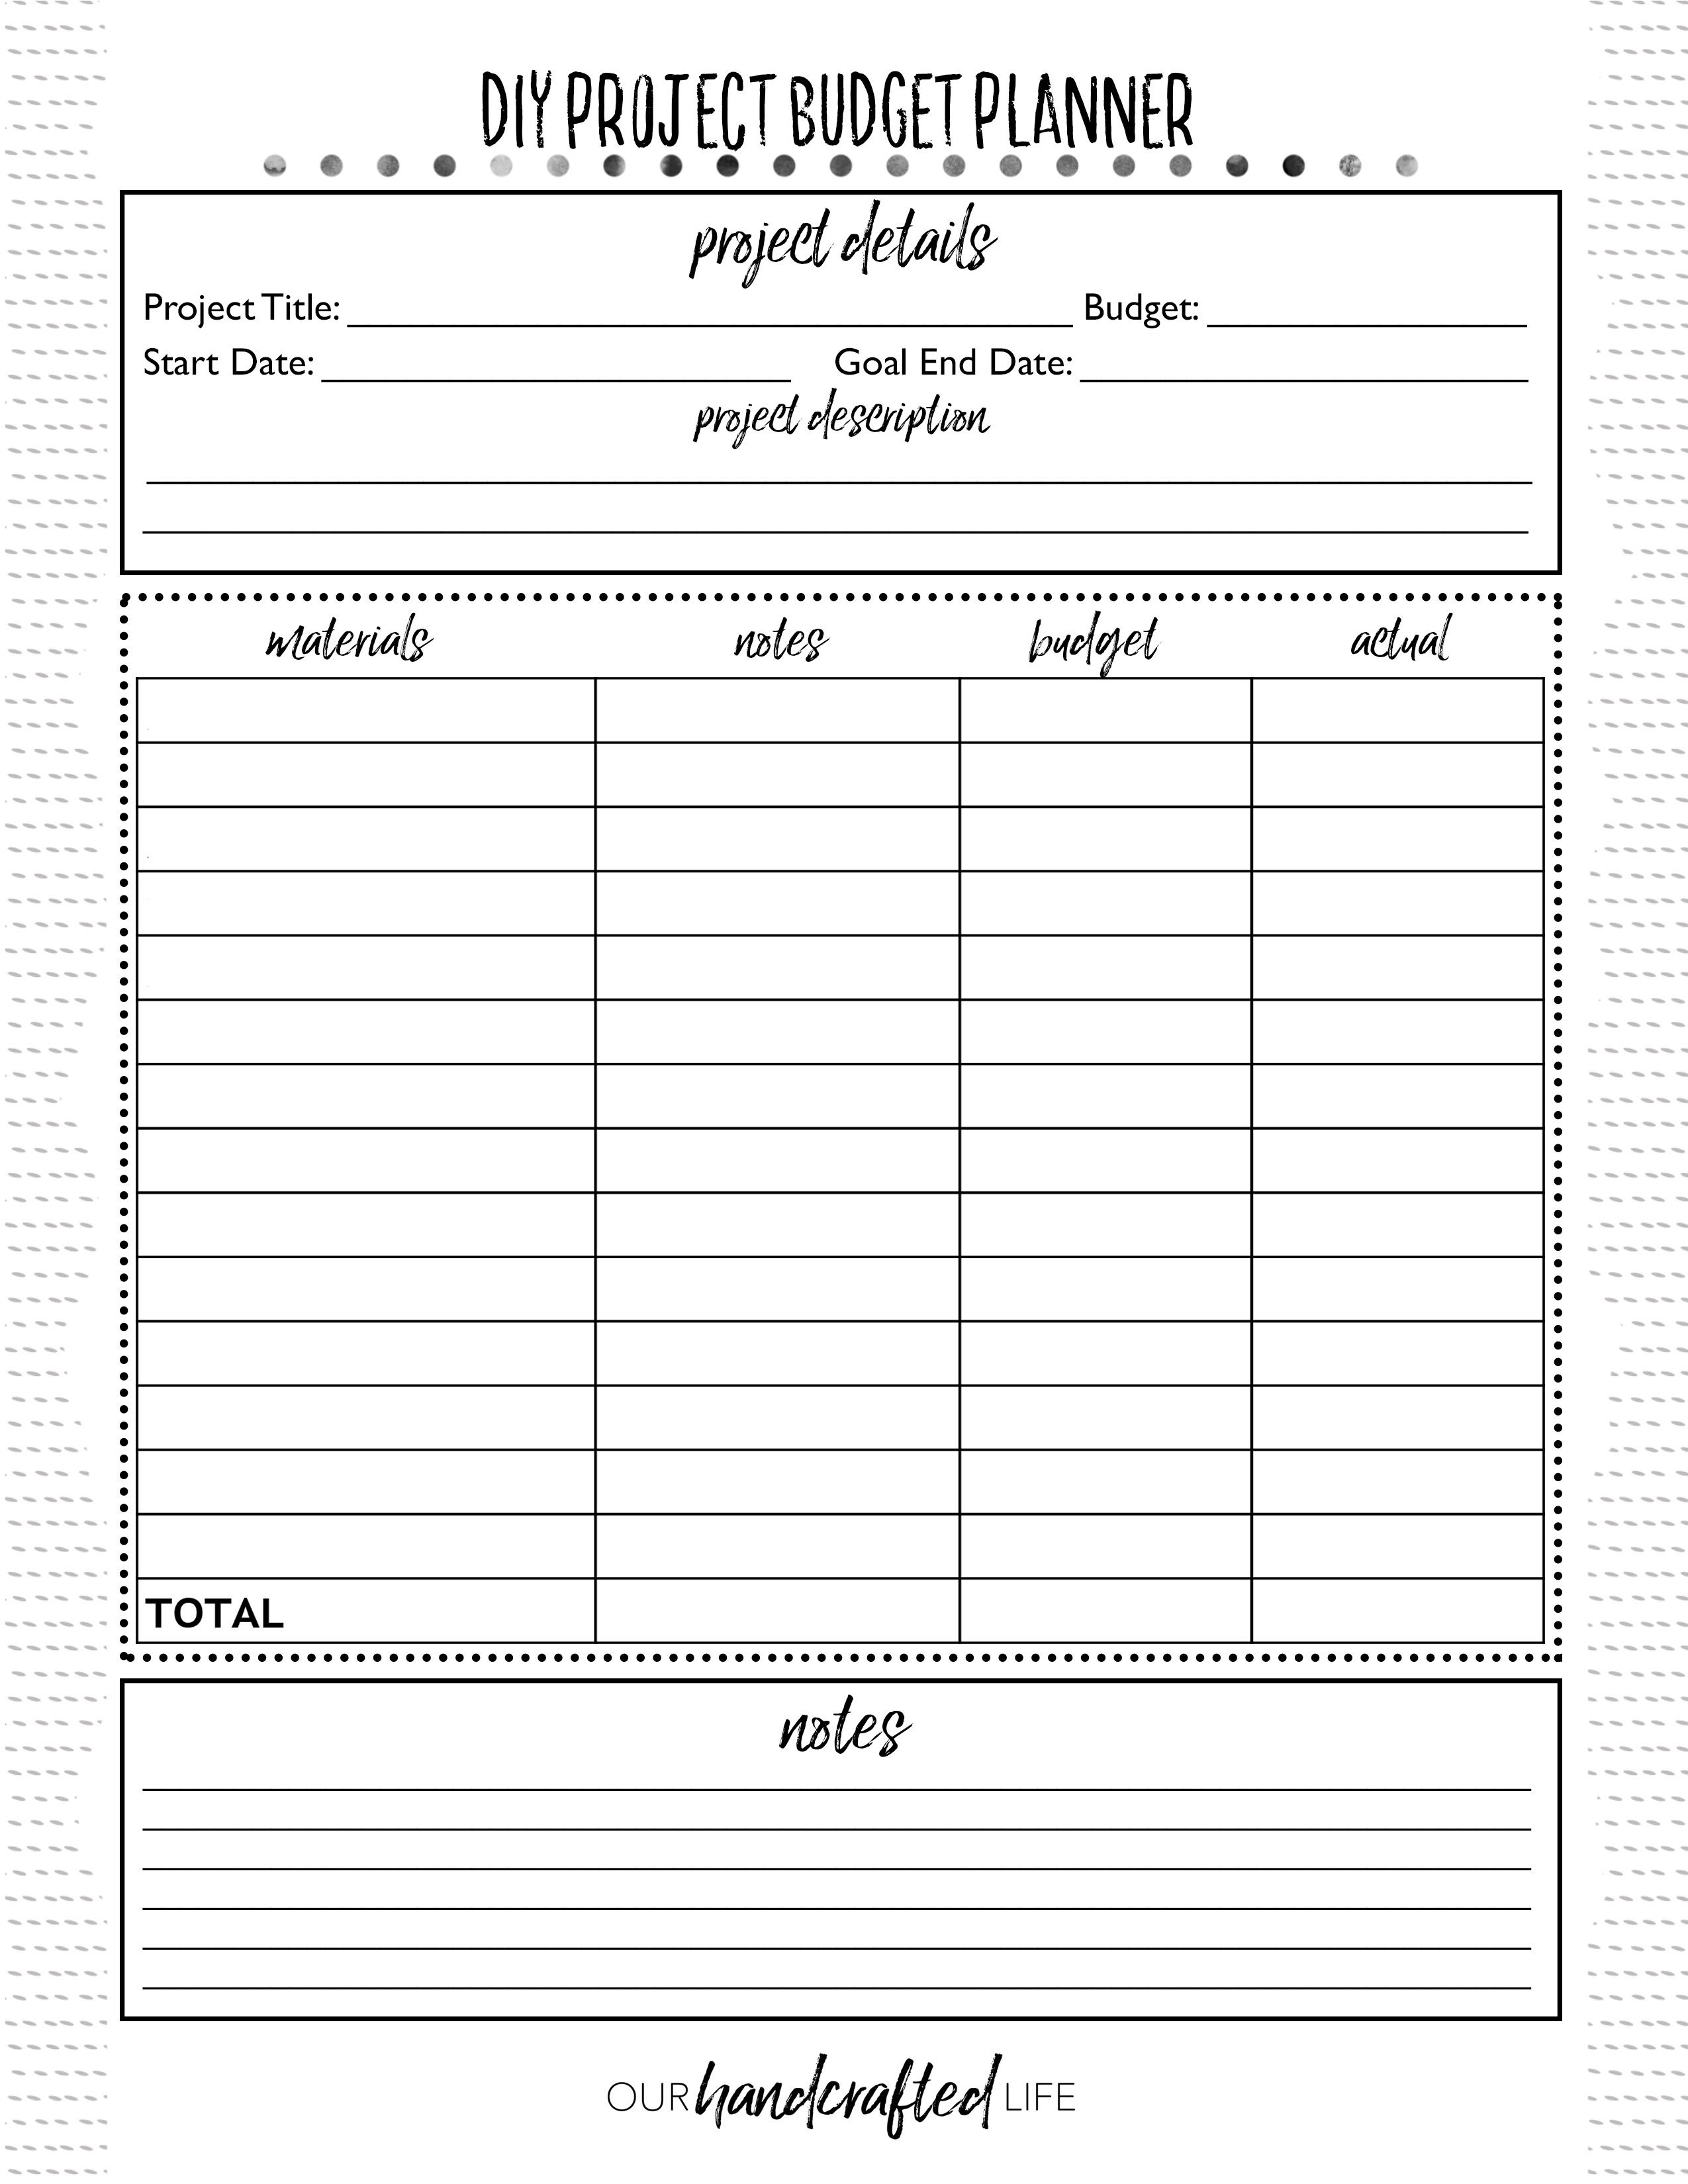 diy-project-planner-free-printable-project-planner-our-handcrafted-life